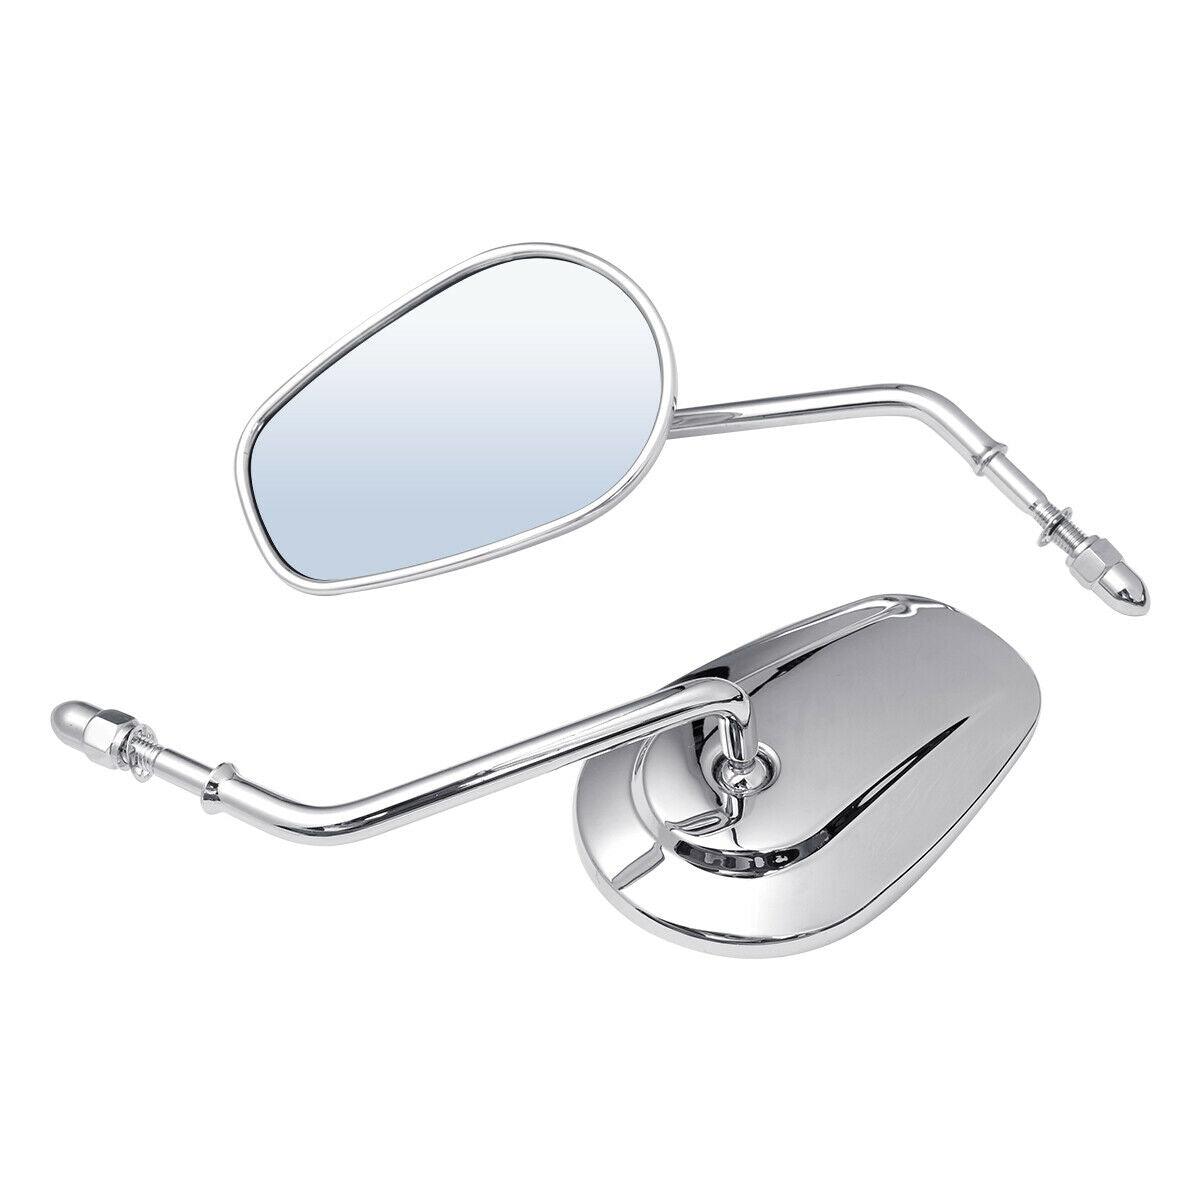 Chrome Rear View Mirrors Fit For Harley Davidson Touring Road King Electra Glide - Moto Life Products